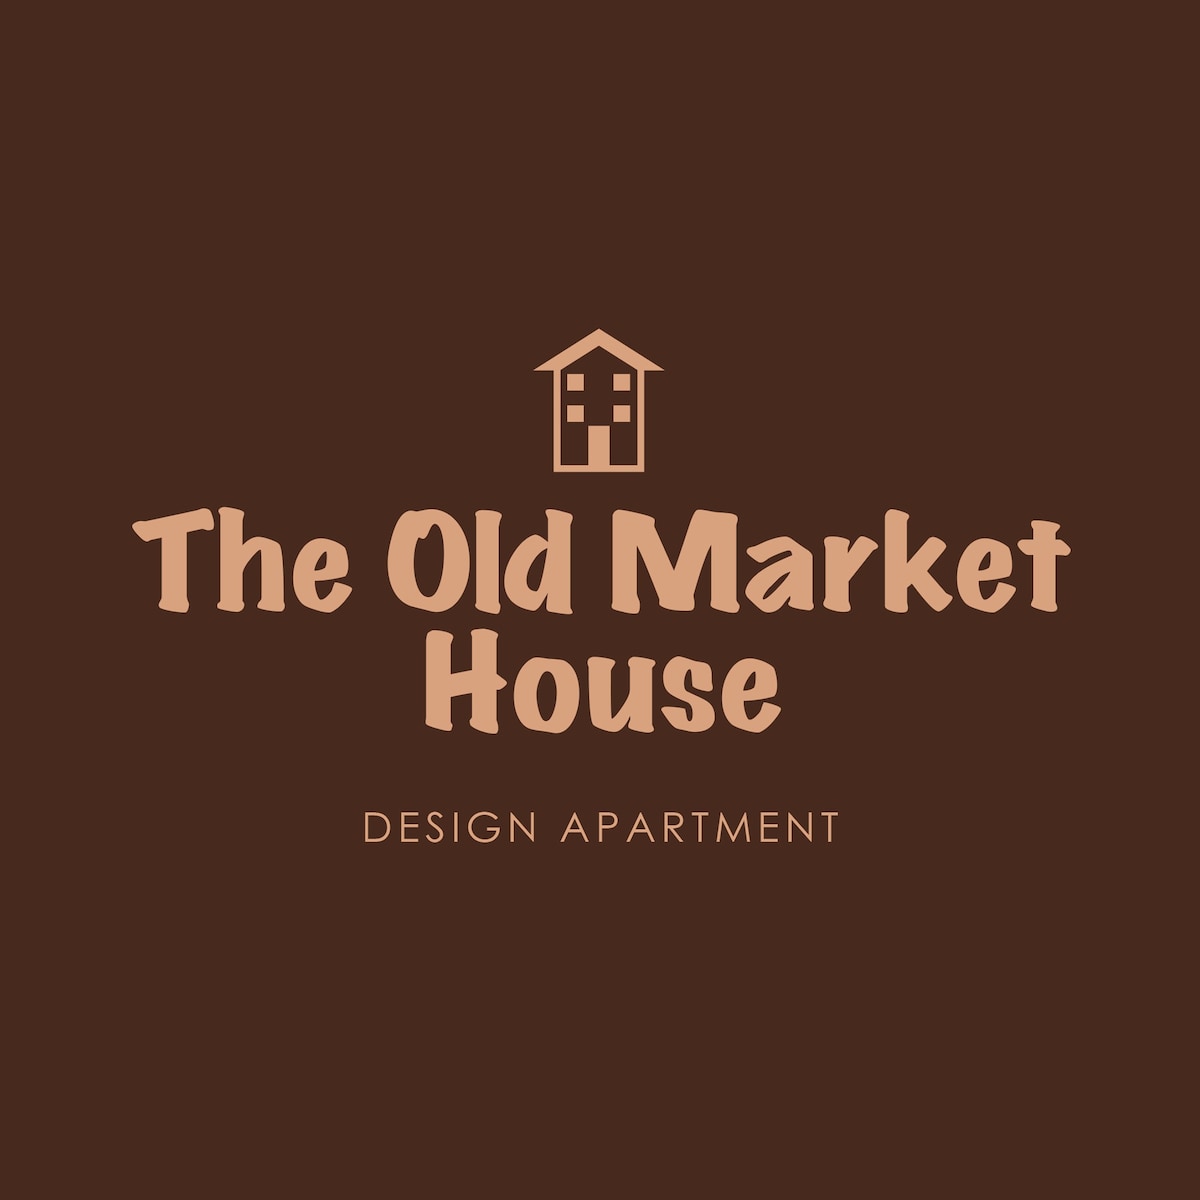 The Old Market House